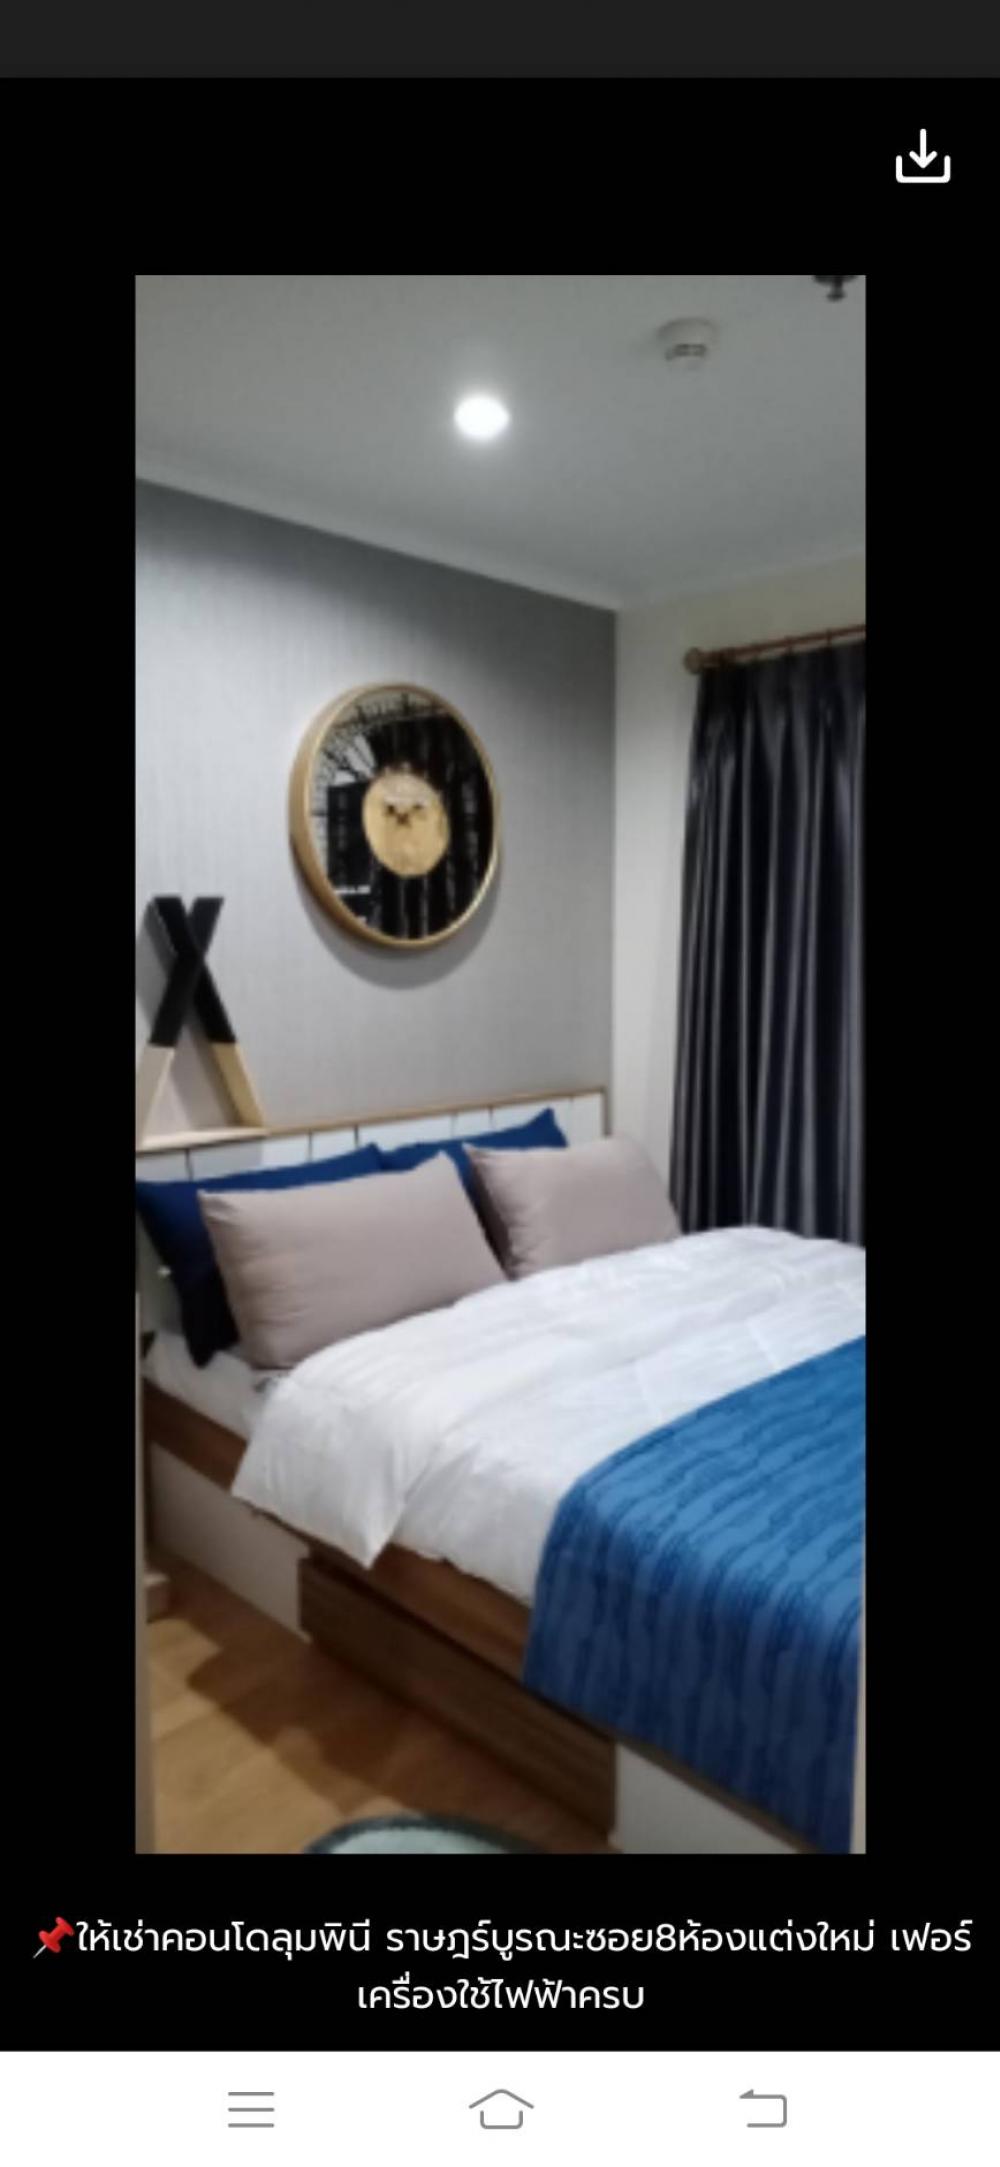 For RentCondoRathburana, Suksawat : 📌 Condo for rent at Lumpini Rat Burana Soi 8, newly renovated room, ready to move in 1/11/65💥💥 This room has the right to park both cars and motorcycles.